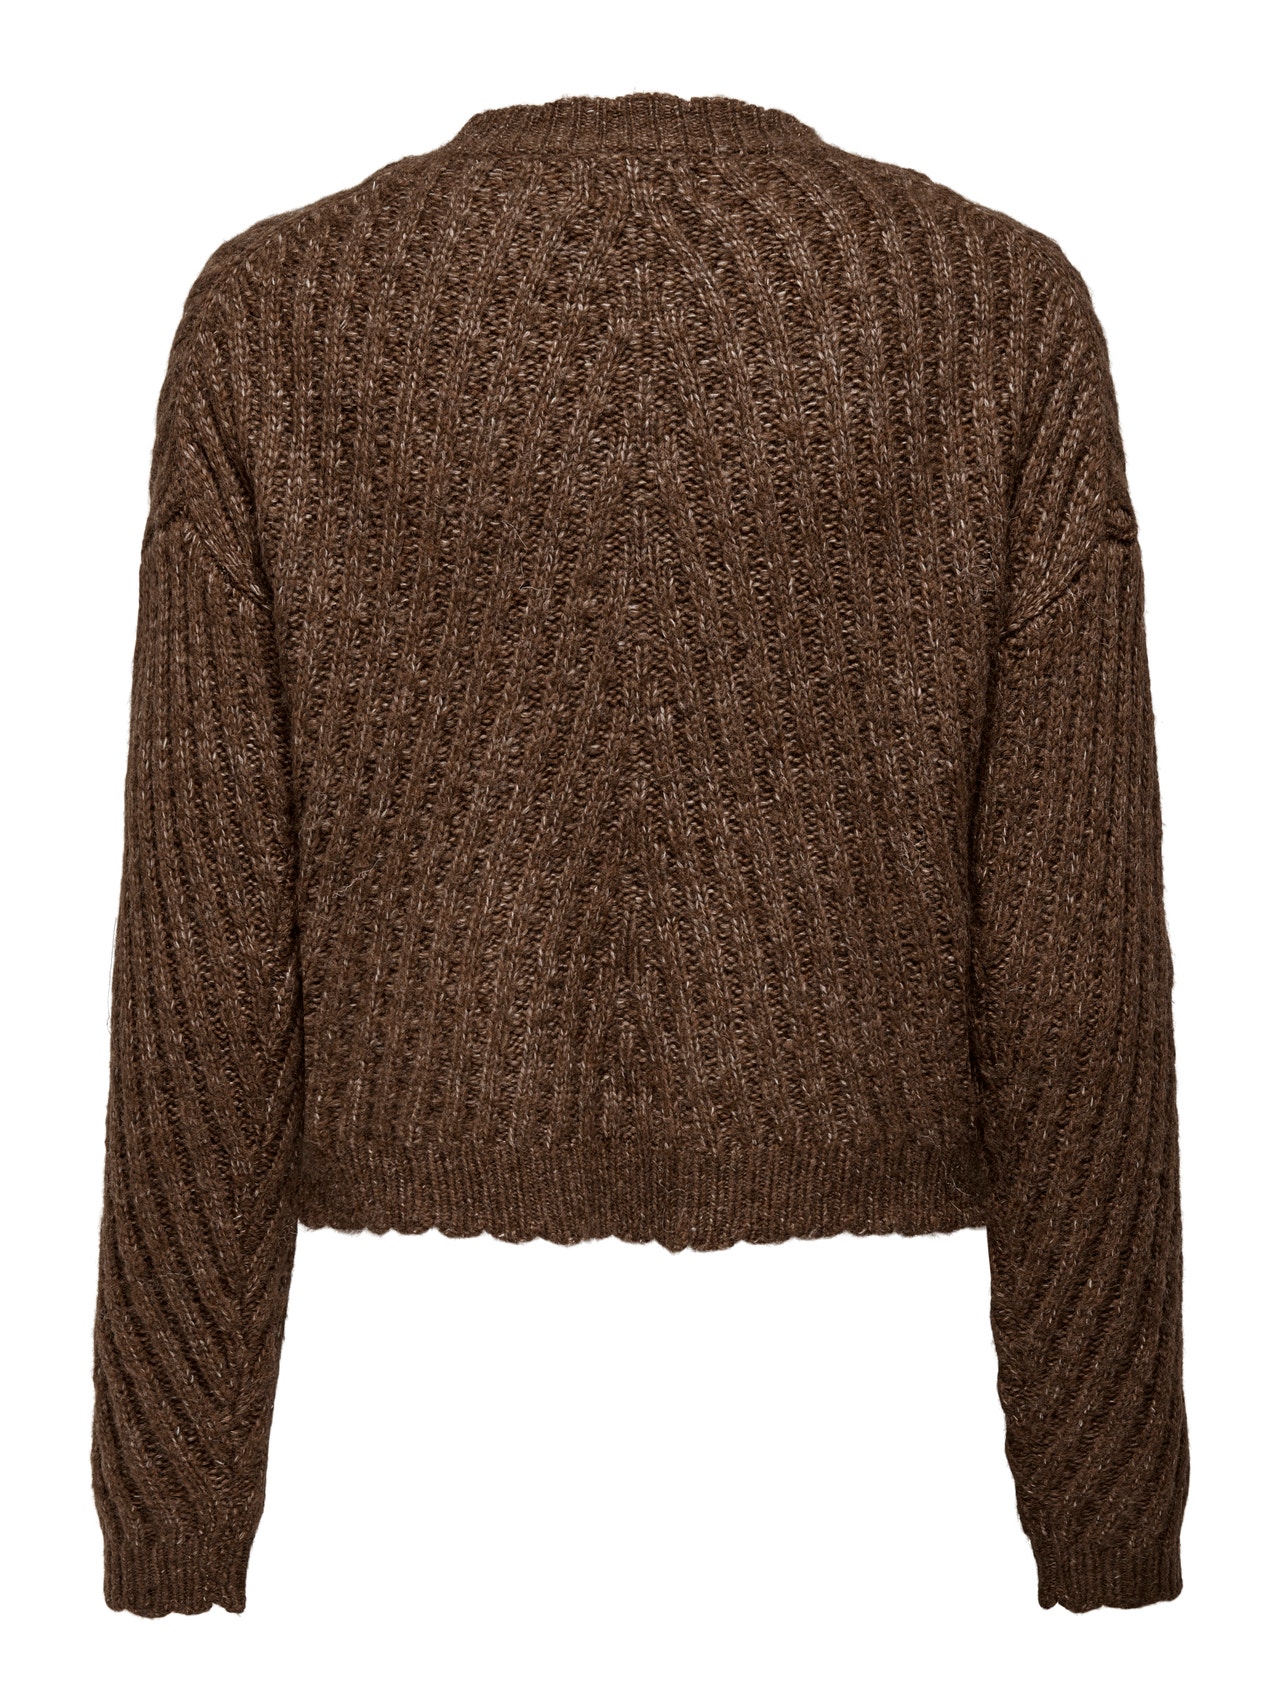 ONLY Pull-overs Col rond -Potting Soil - 15269070